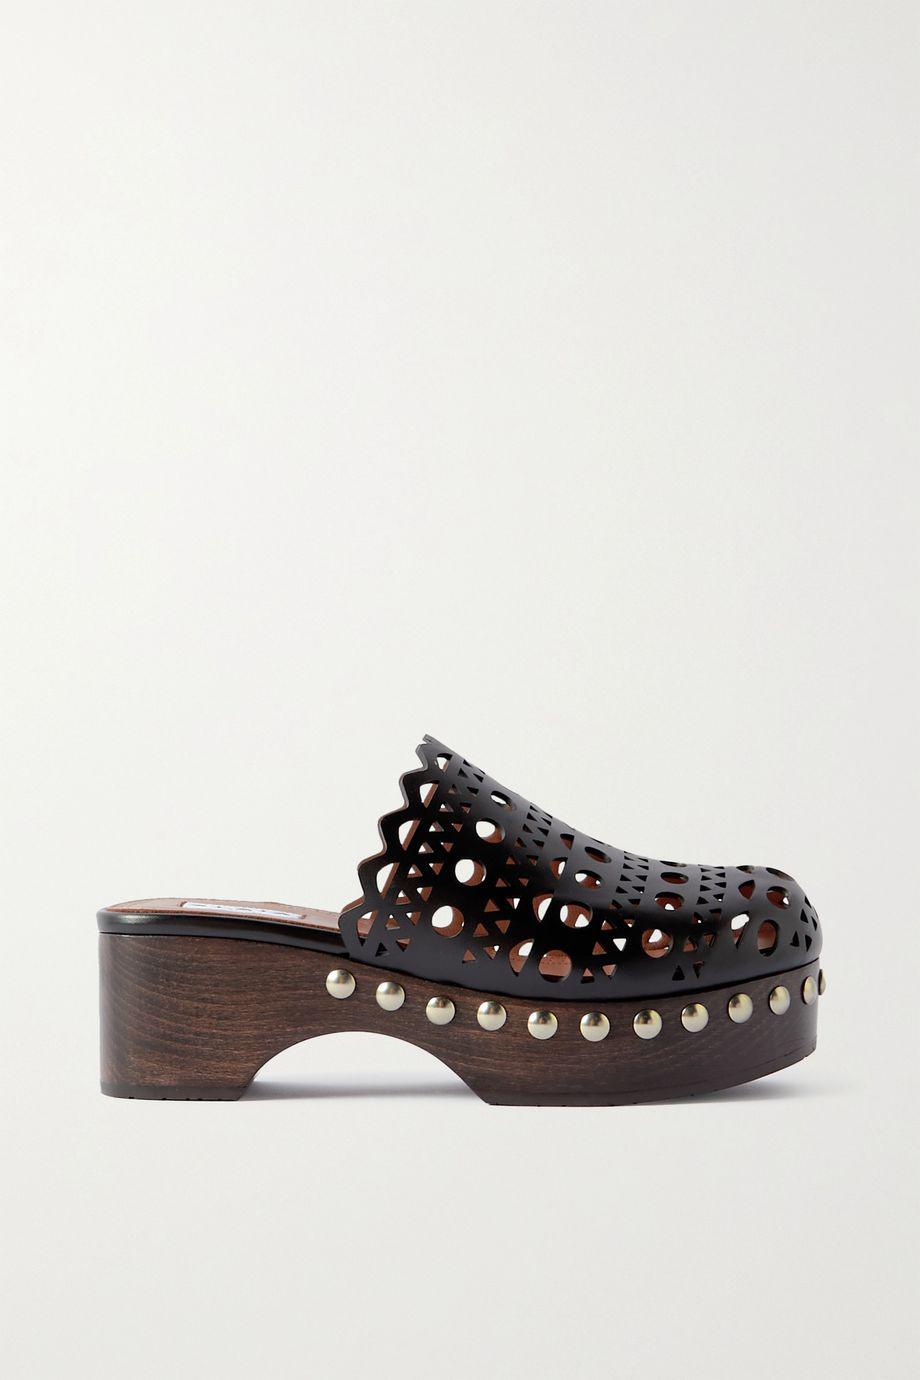 60 studded laser-cut leather platform clogs by ALAIA